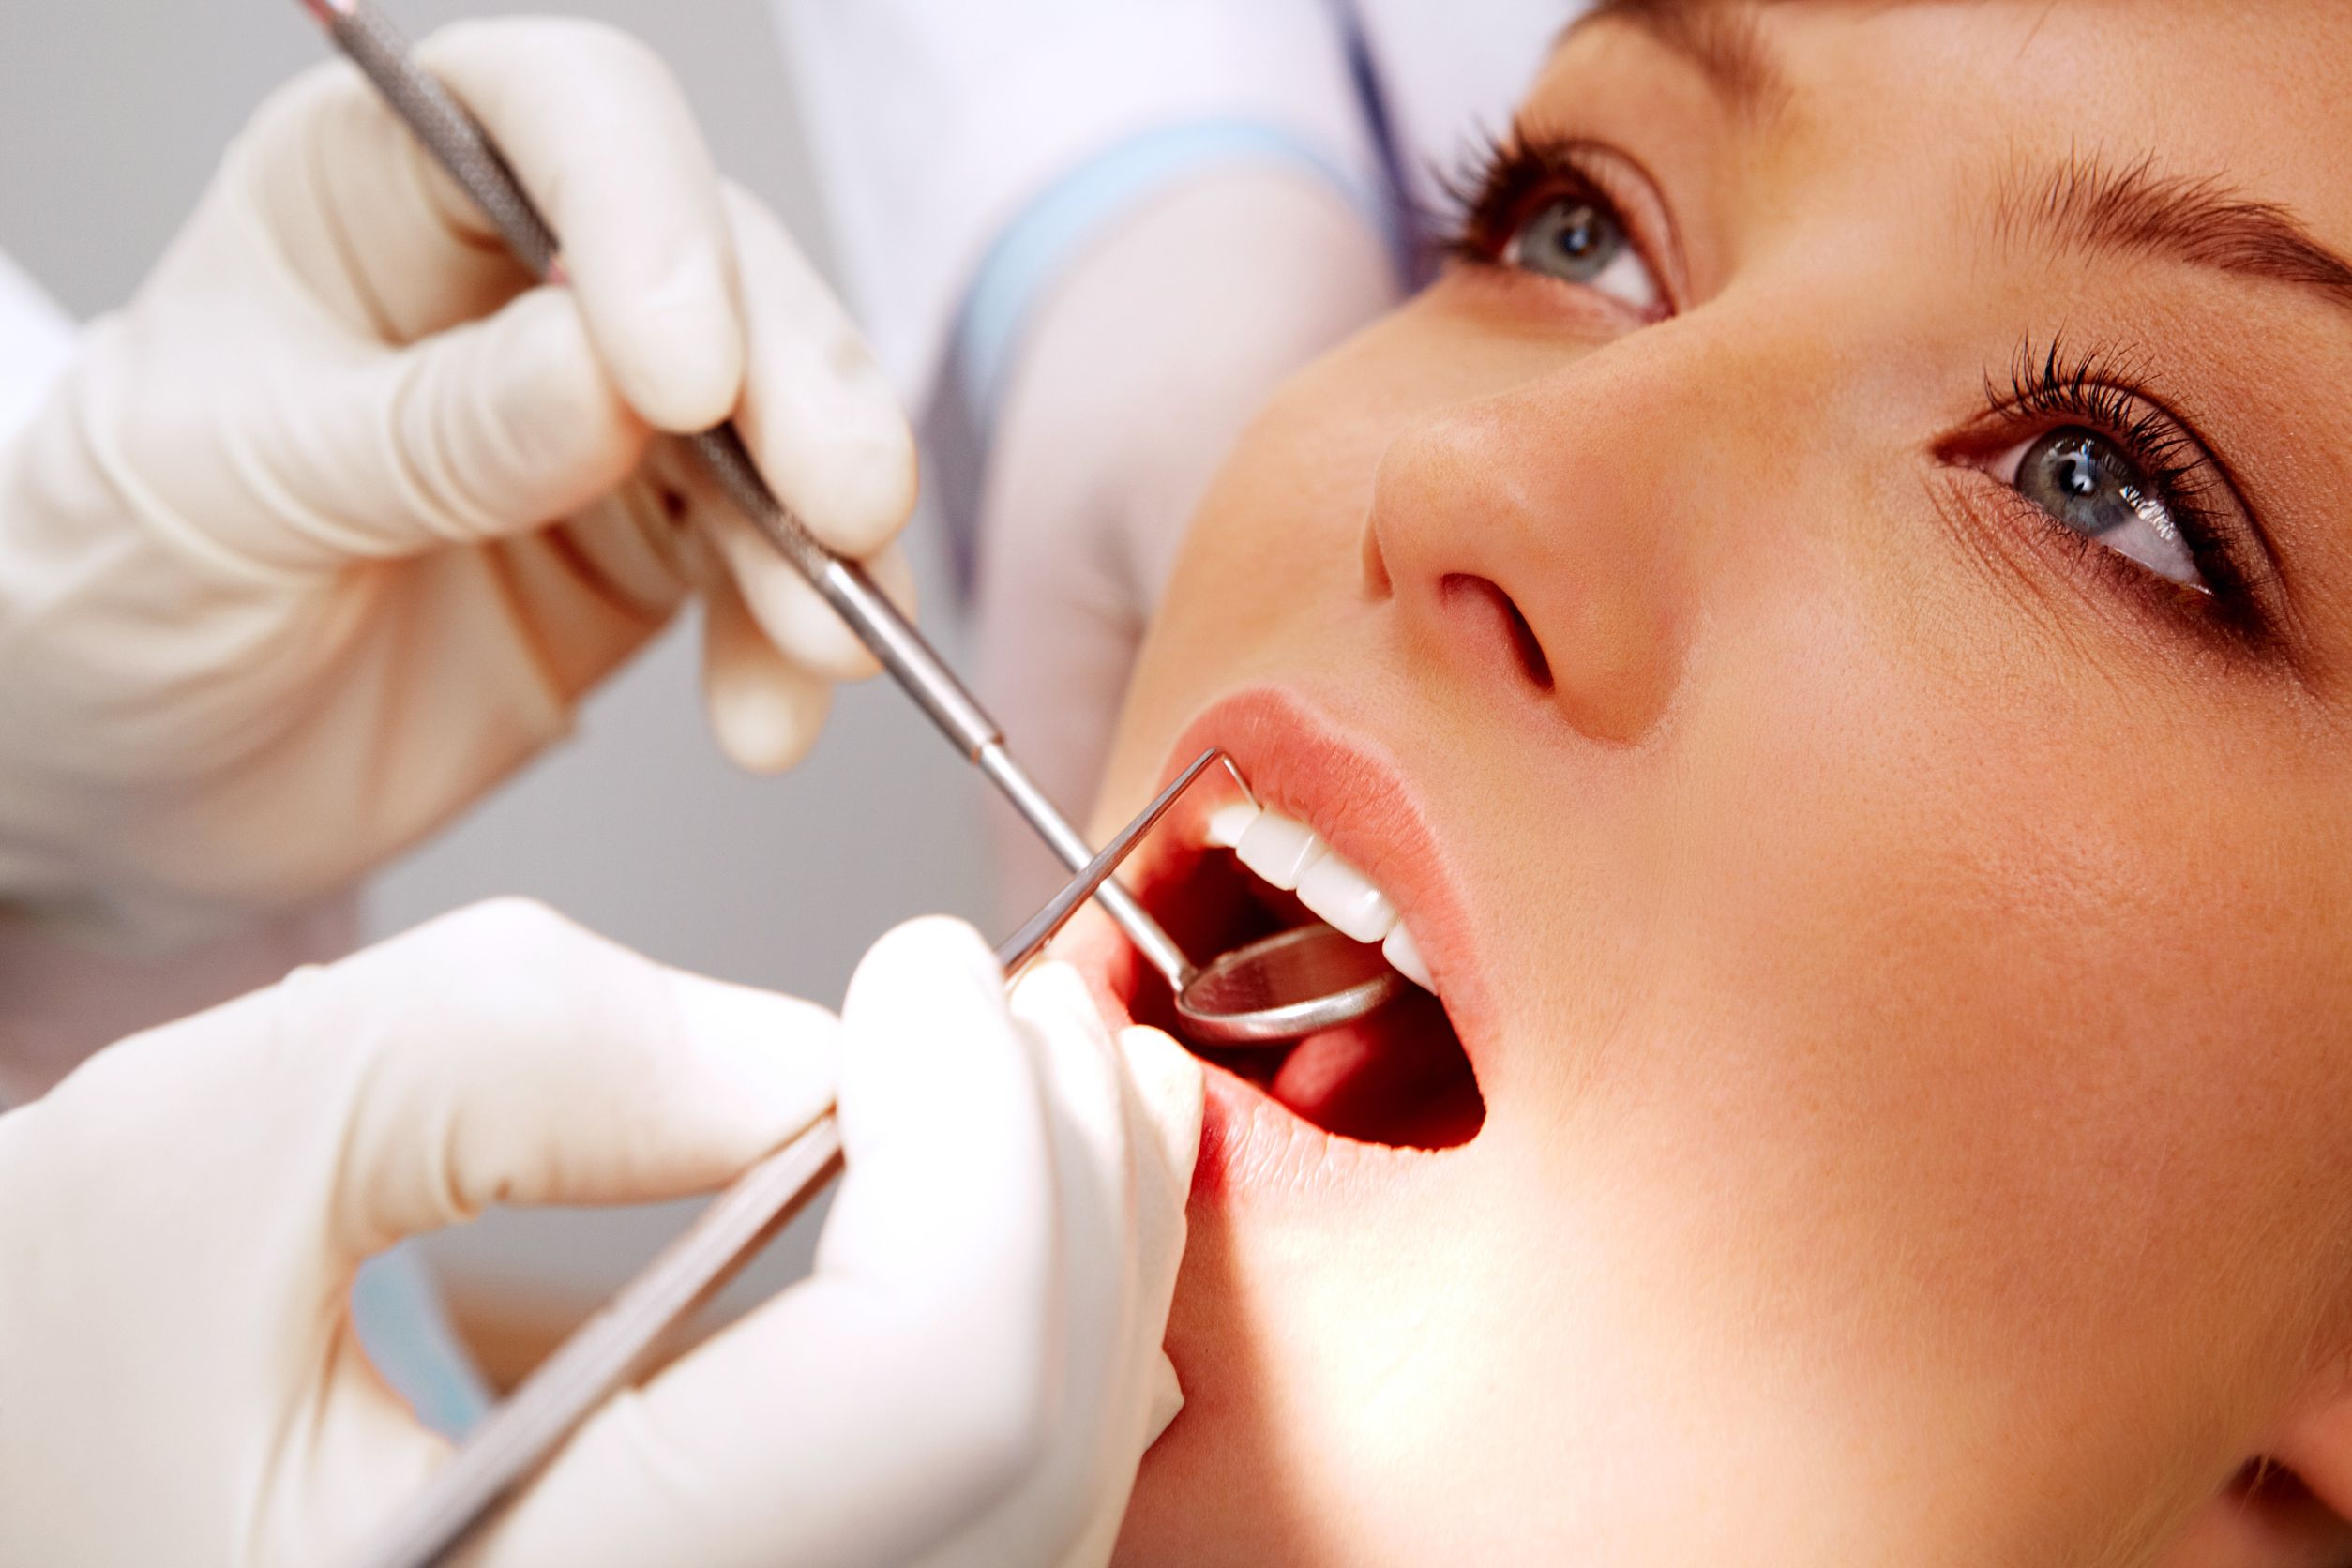 Are You Considering Dental Implants in Detroit MI?